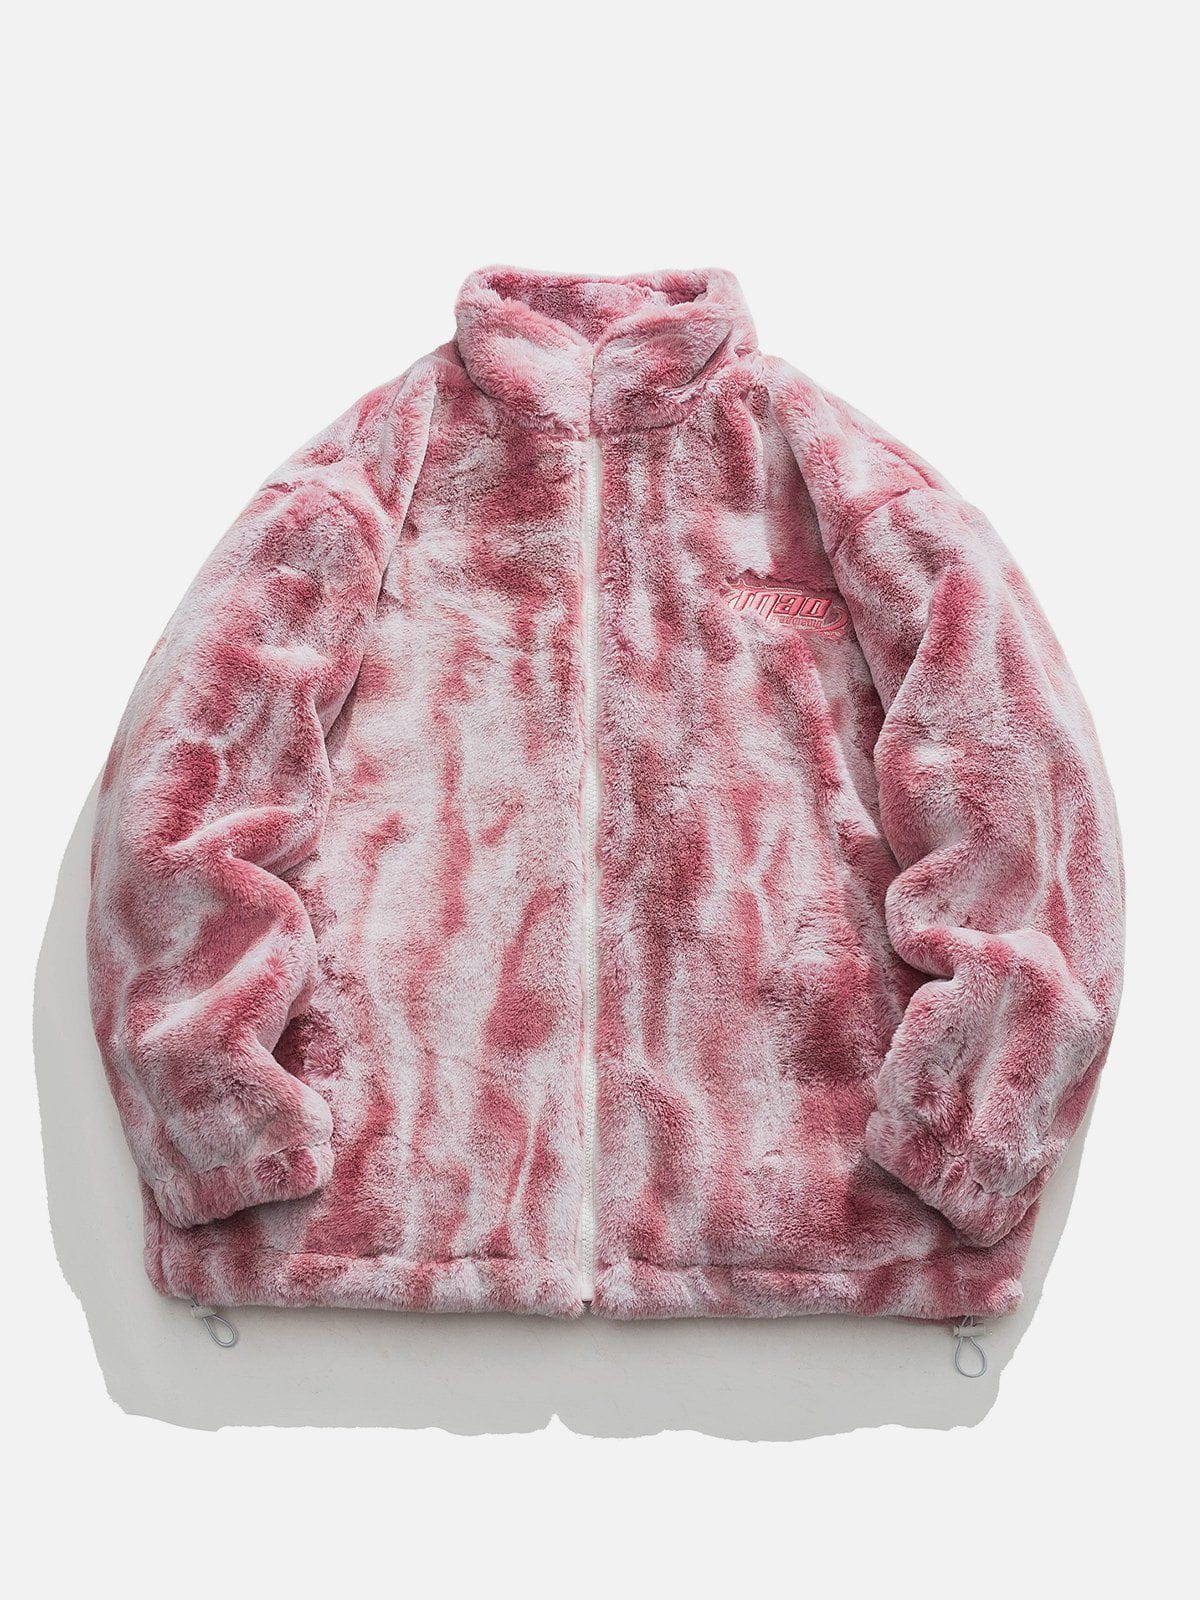 LUXENFY™ - Tie Dye Gradient Embroidered Plush Stand Collar Winter Coat luxenfy.com